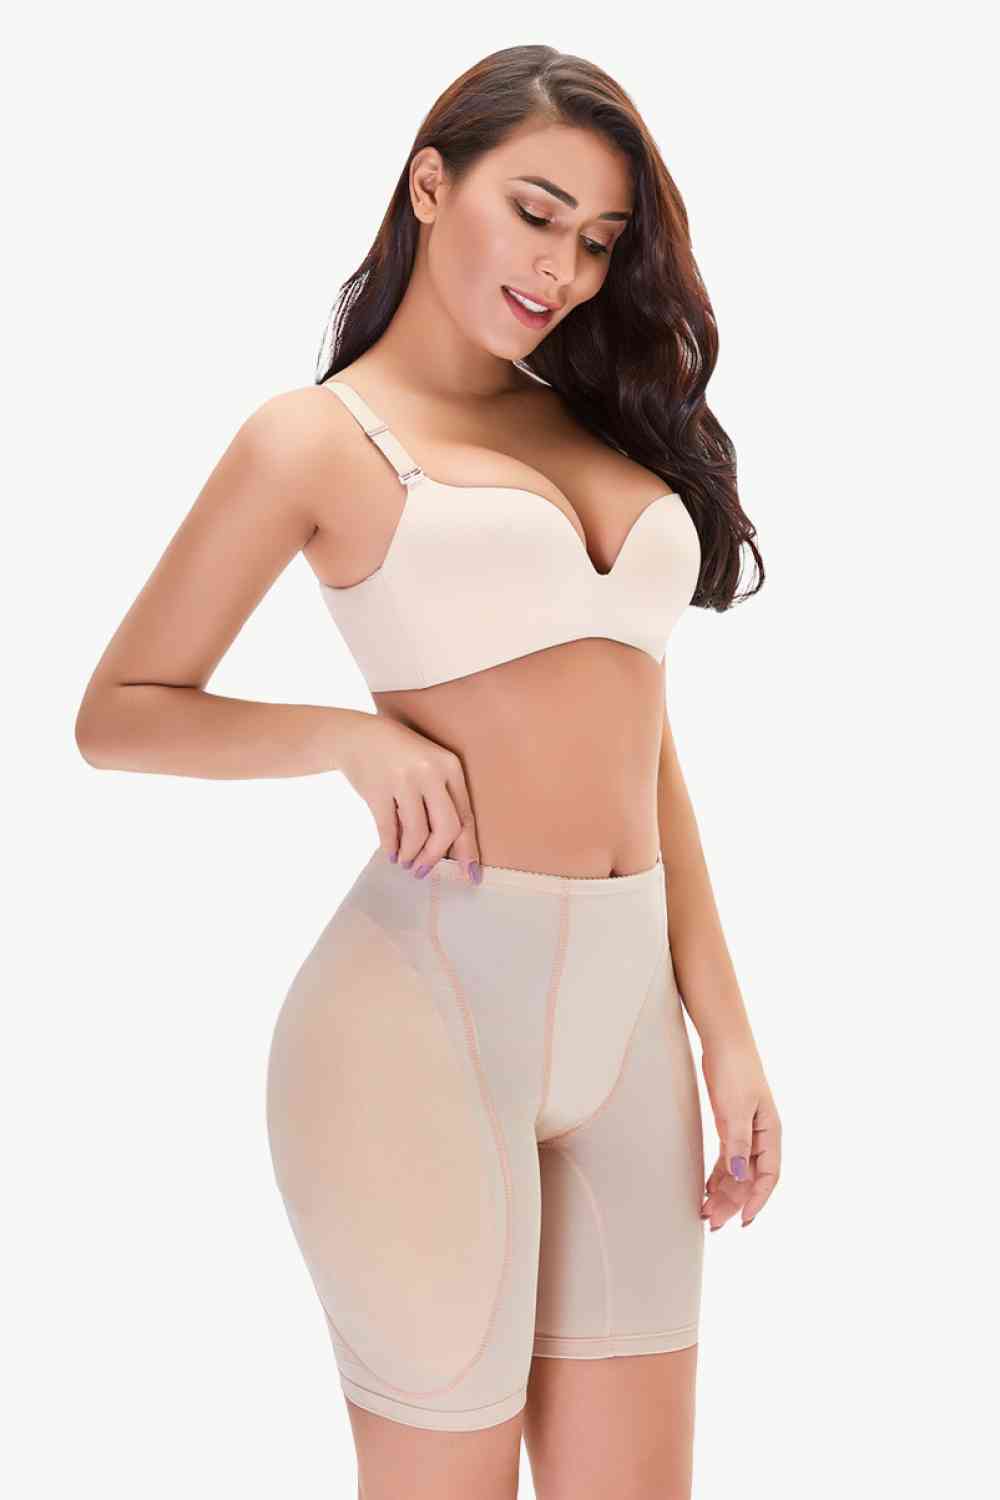 Full Size Lifting Pull-On Shaping Shorts - Shapewear - FITGGINS